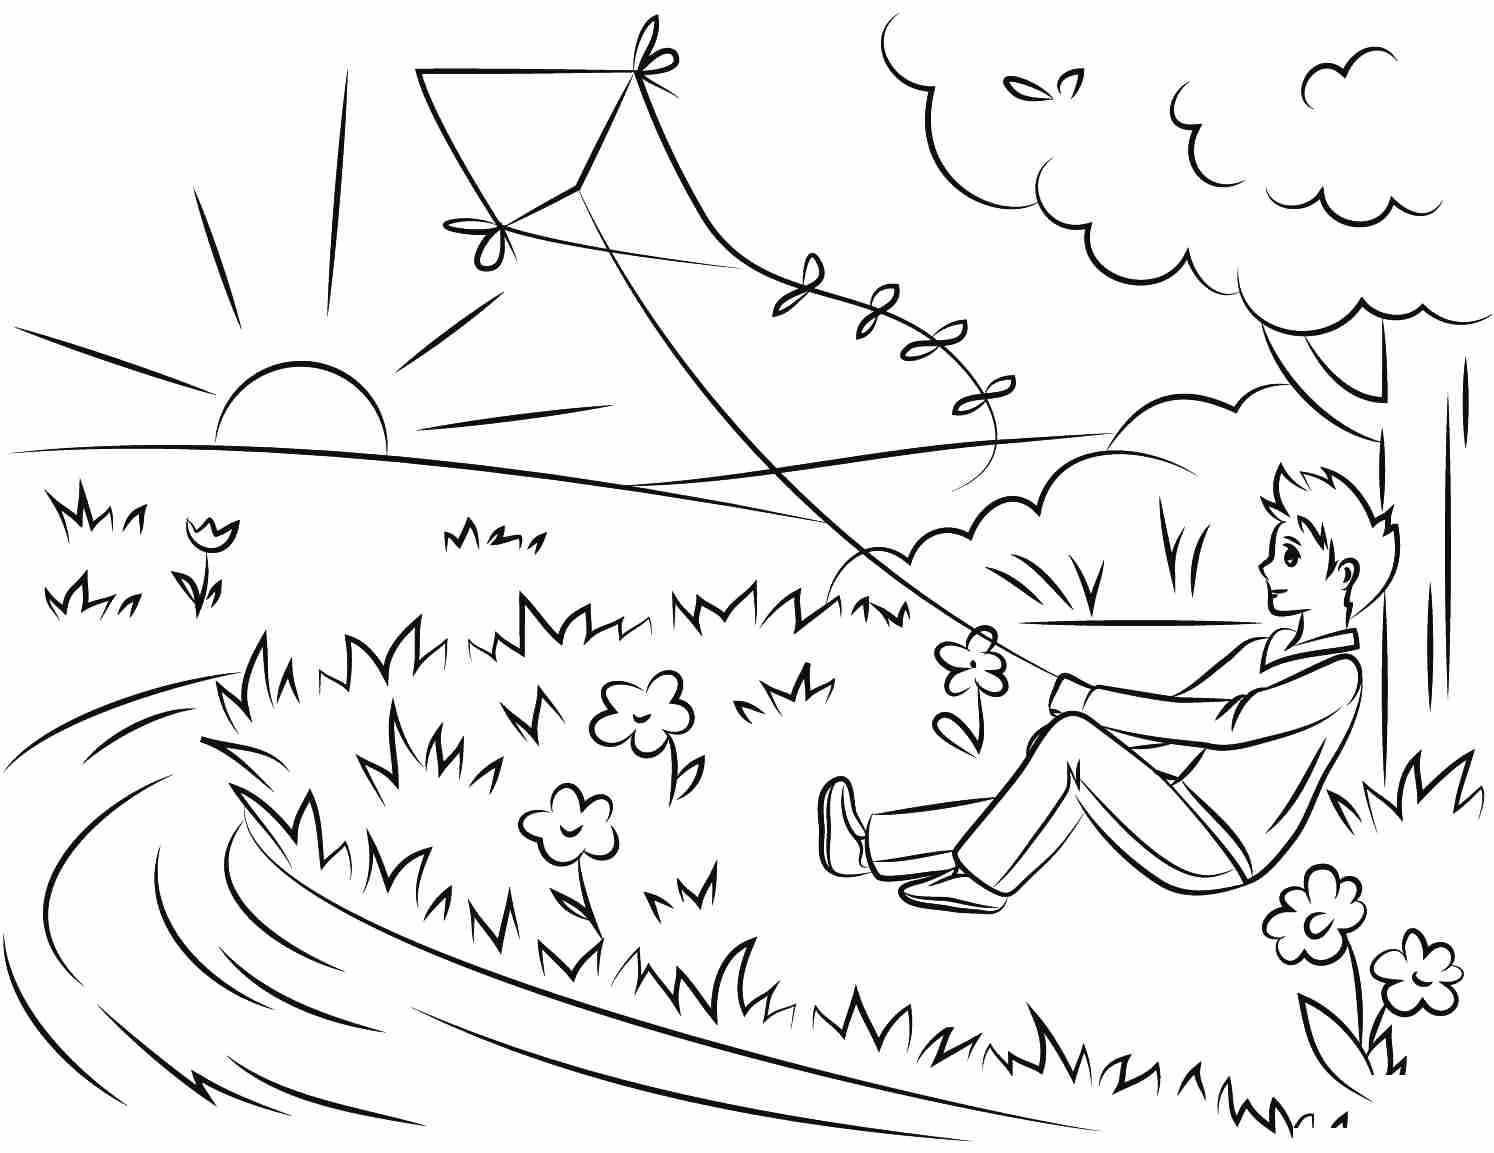 The Boy Flies A Kite In The Sunset Coloring Pages